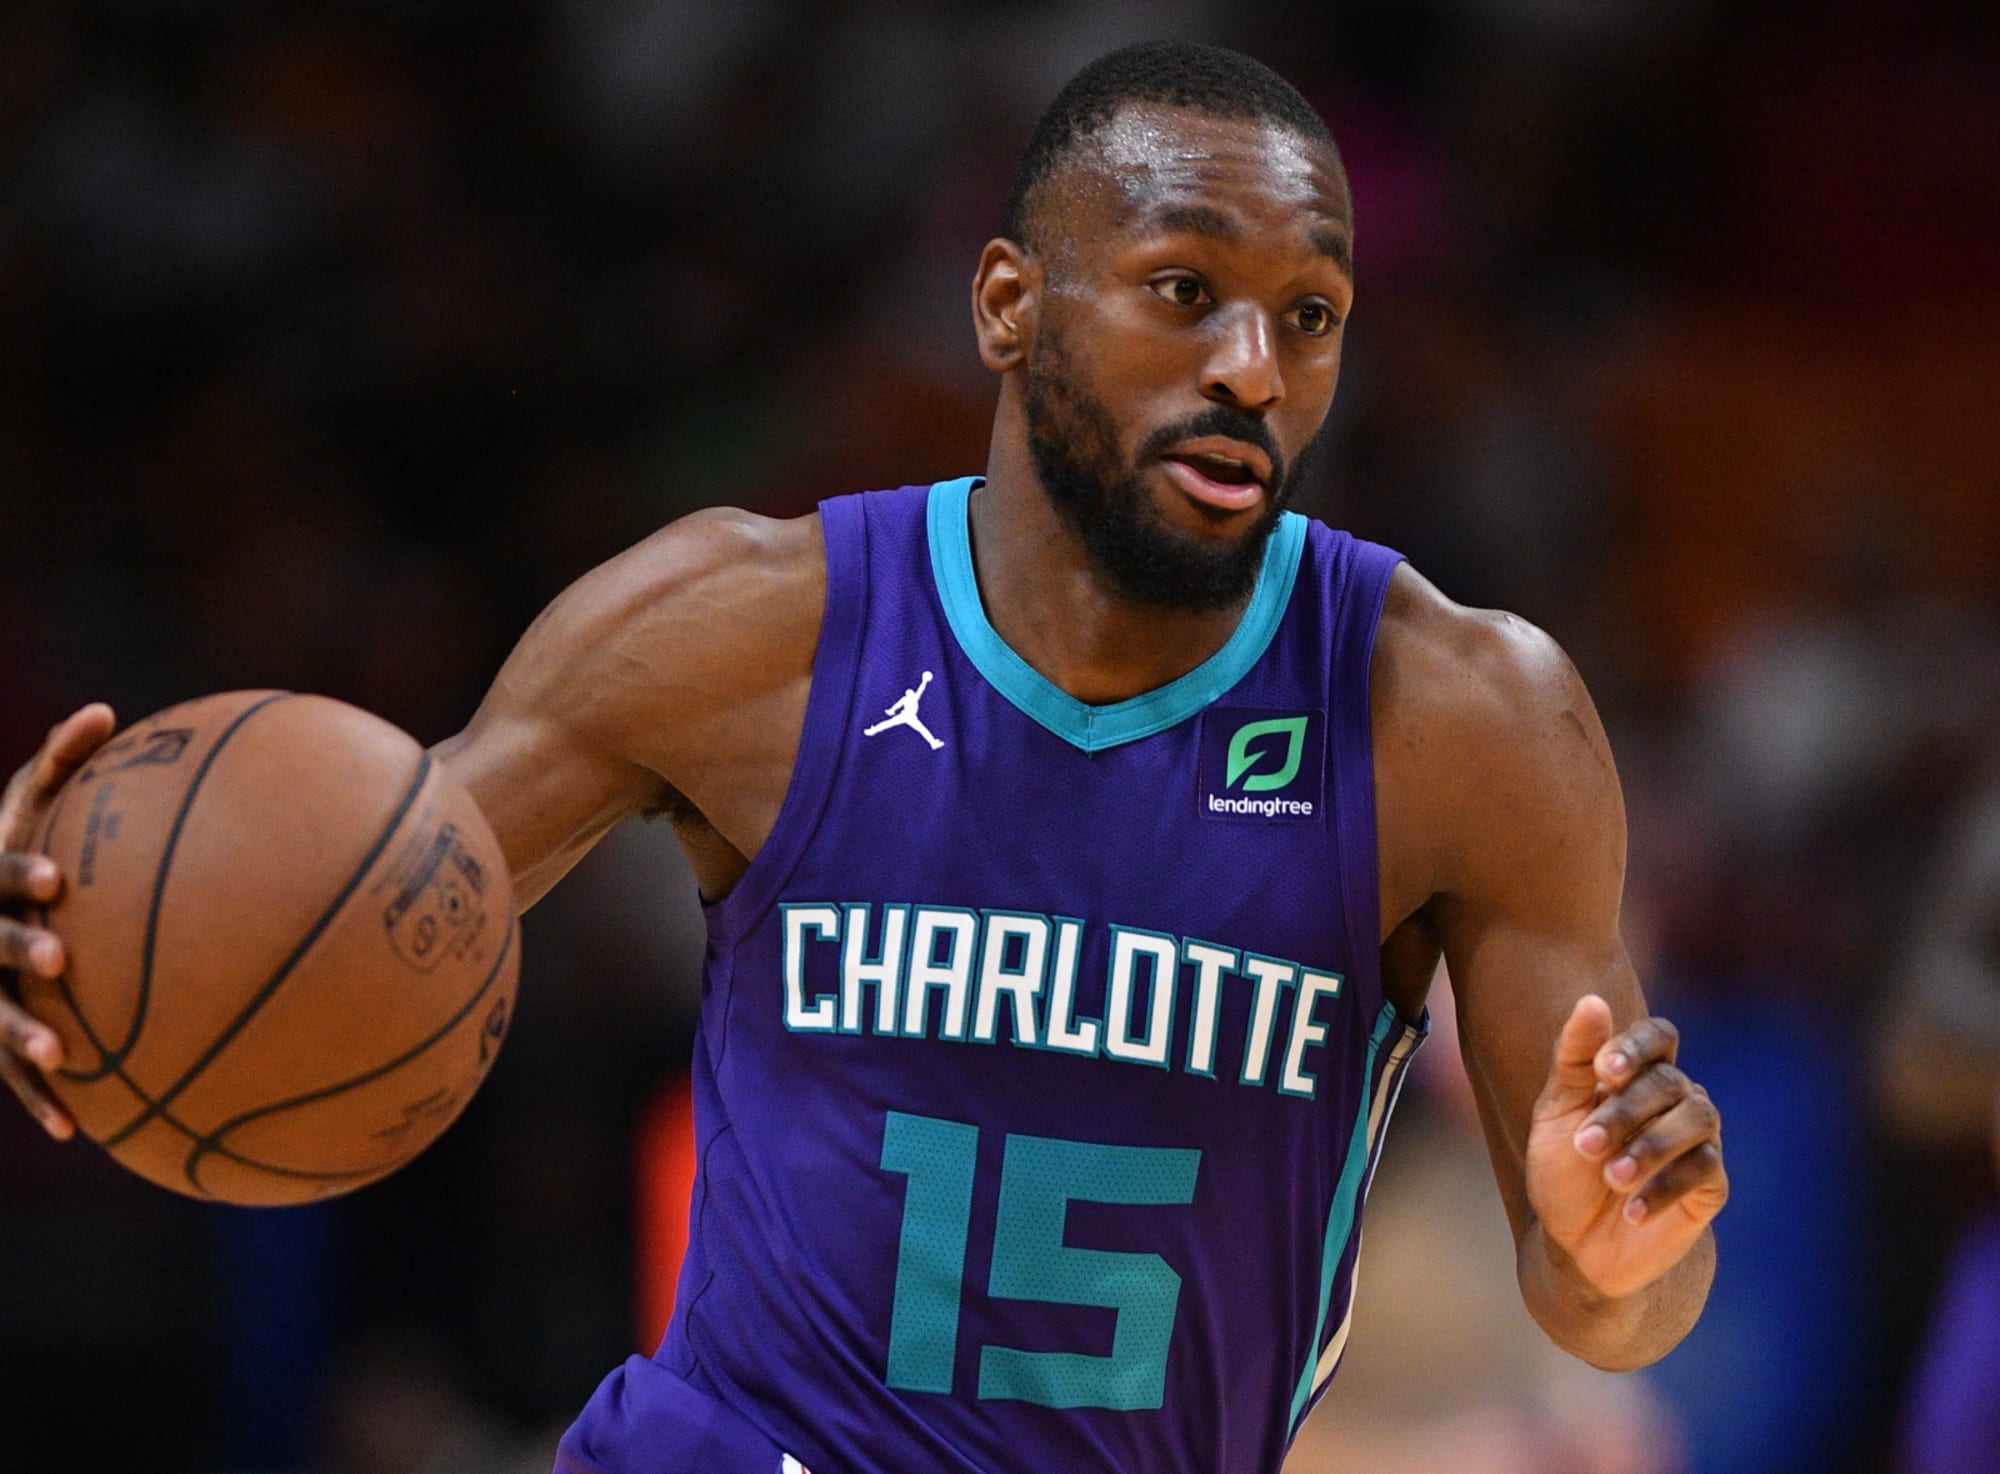 Why Hornets All-Star Kemba Walker is suddenly on the trade block